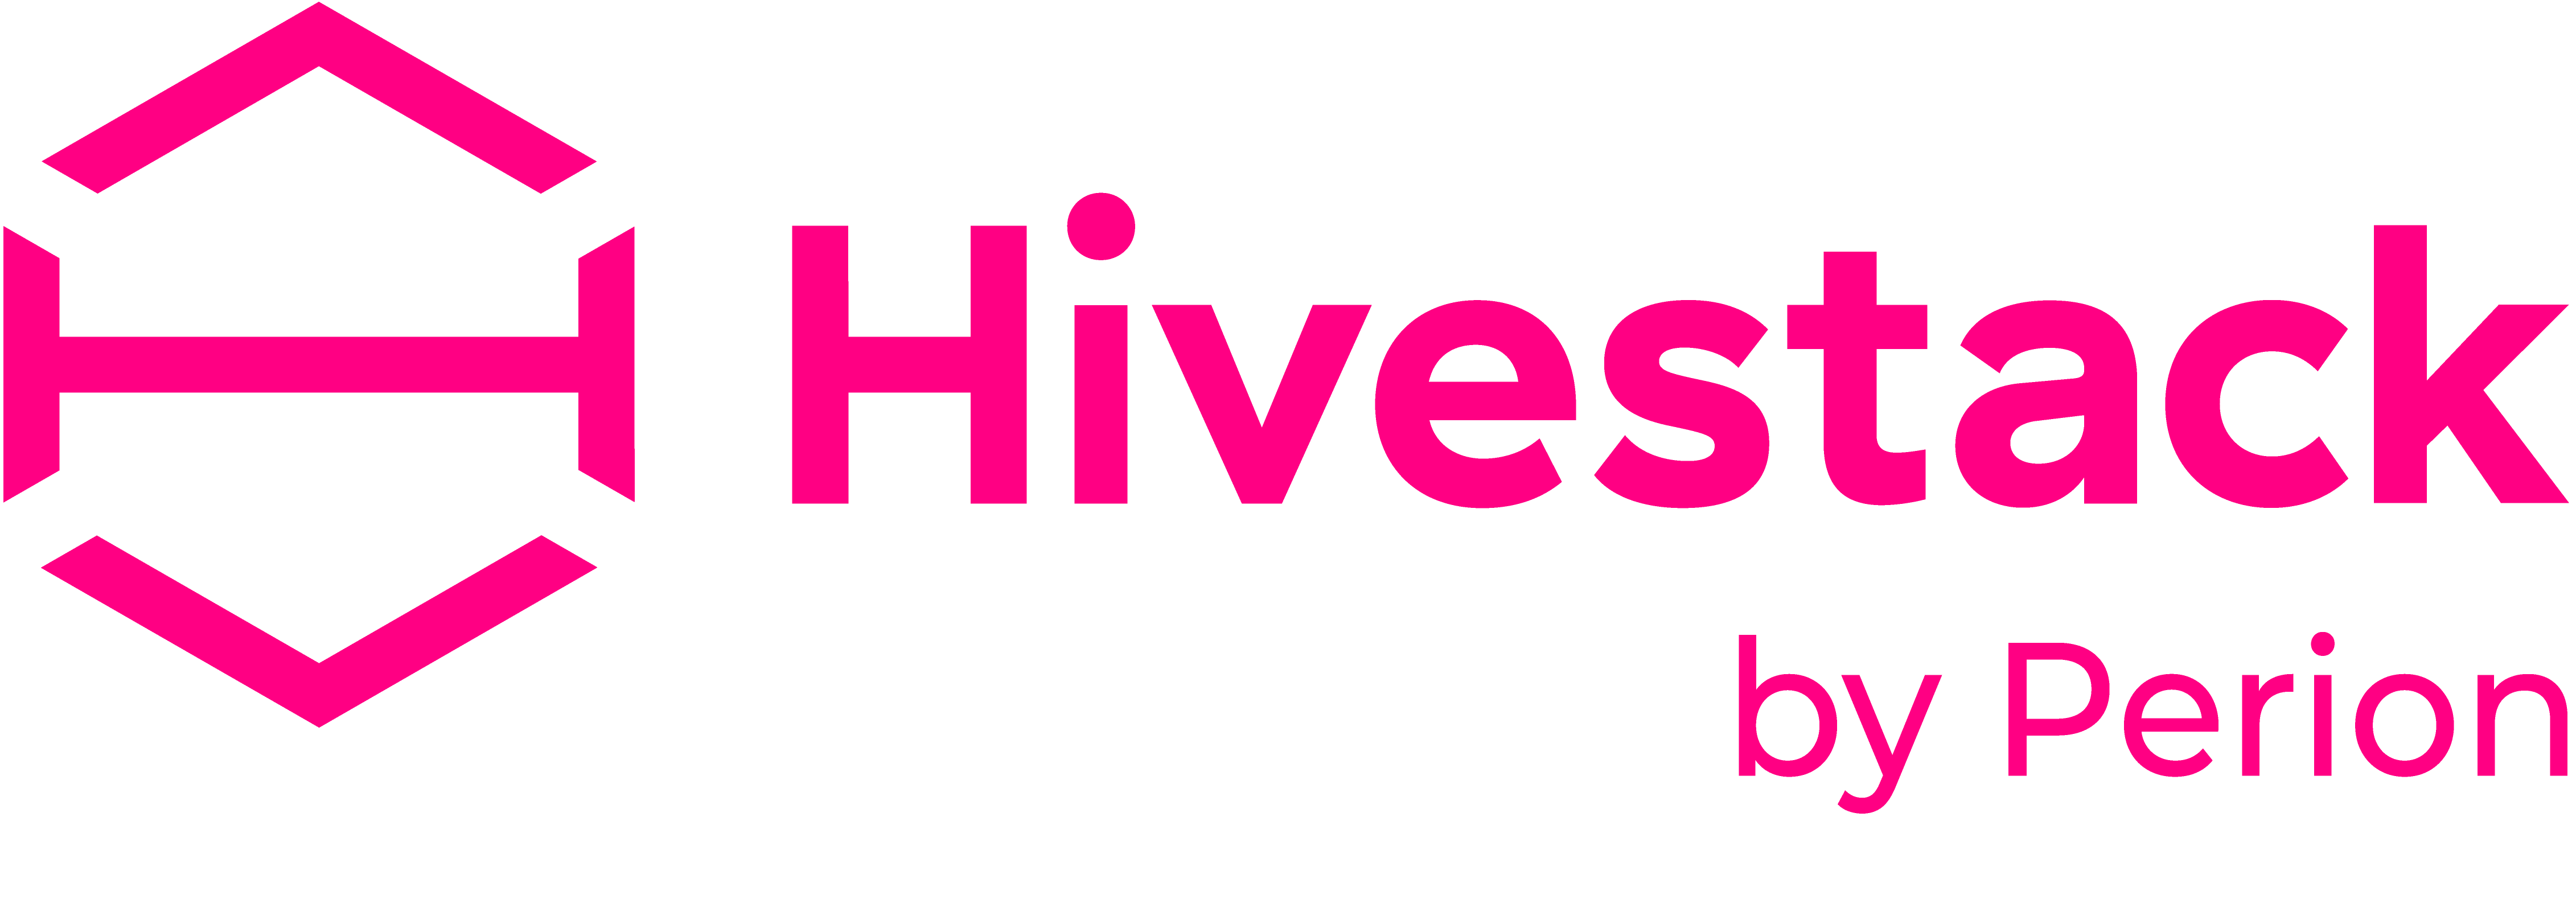 Hivestack by Perion_logo_Pink_Standard